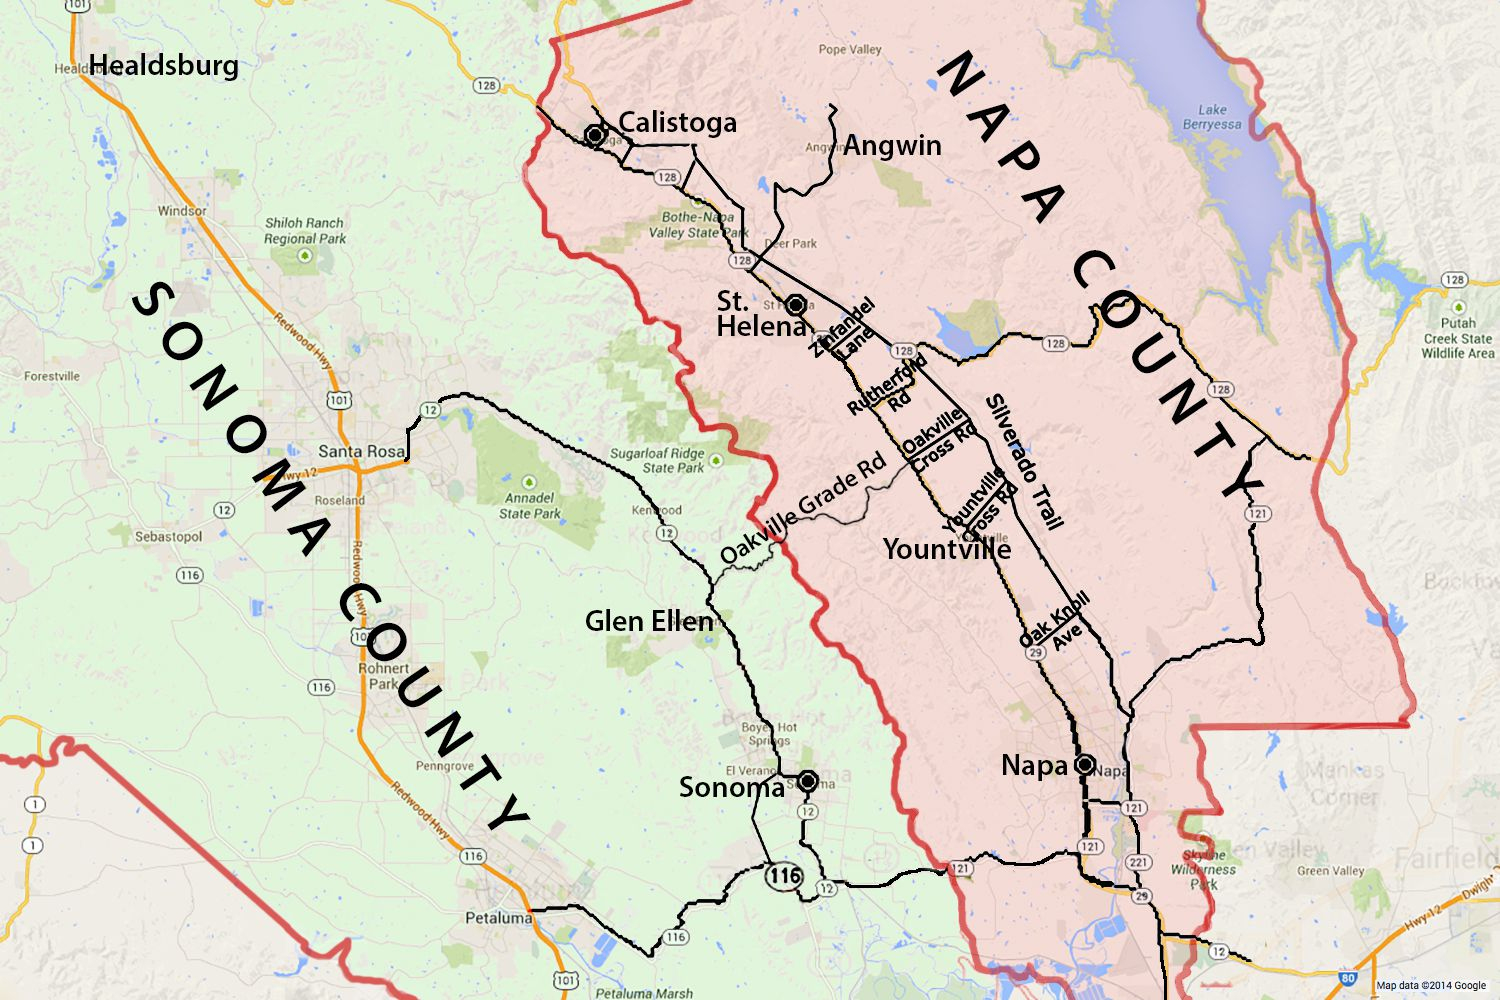 Wine Country Map: Sonoma And Napa Valley - California Wine Country Map Napa